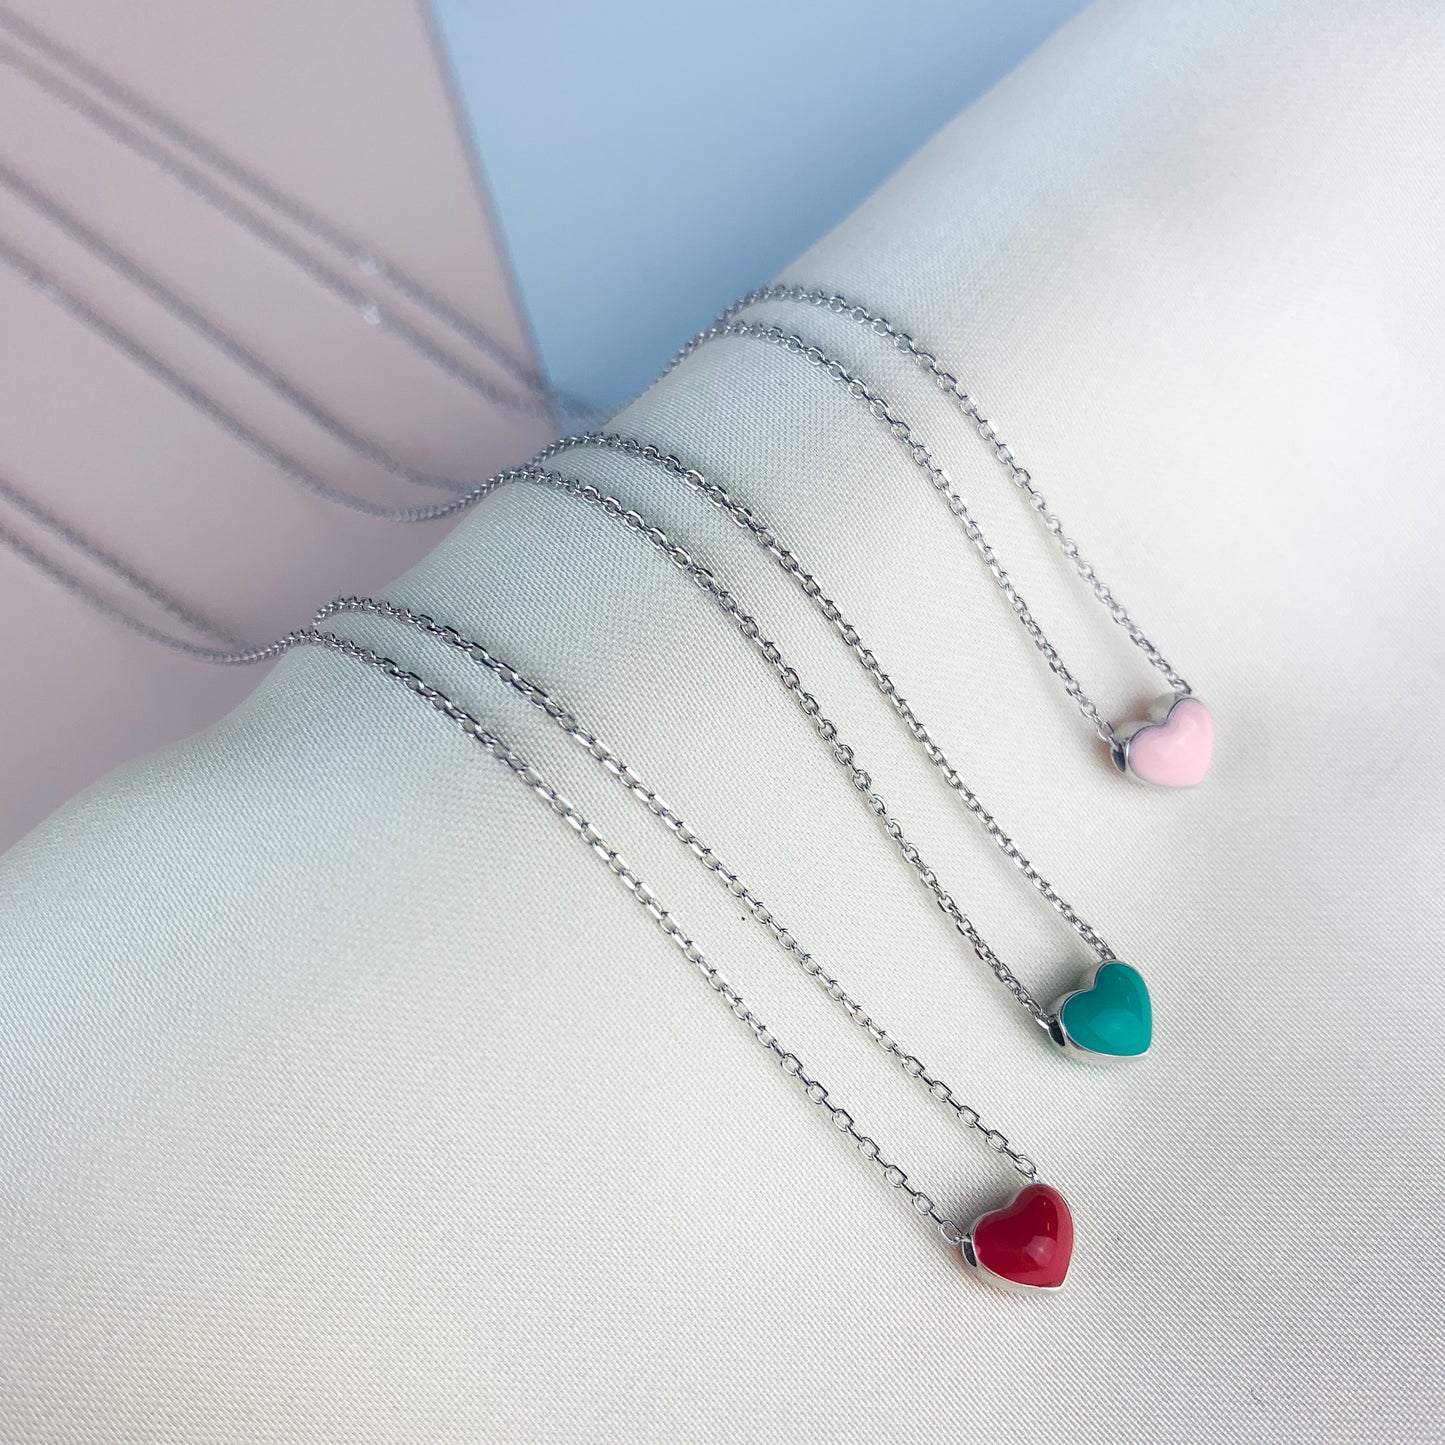 Red, Pink or Green Heart Necklace